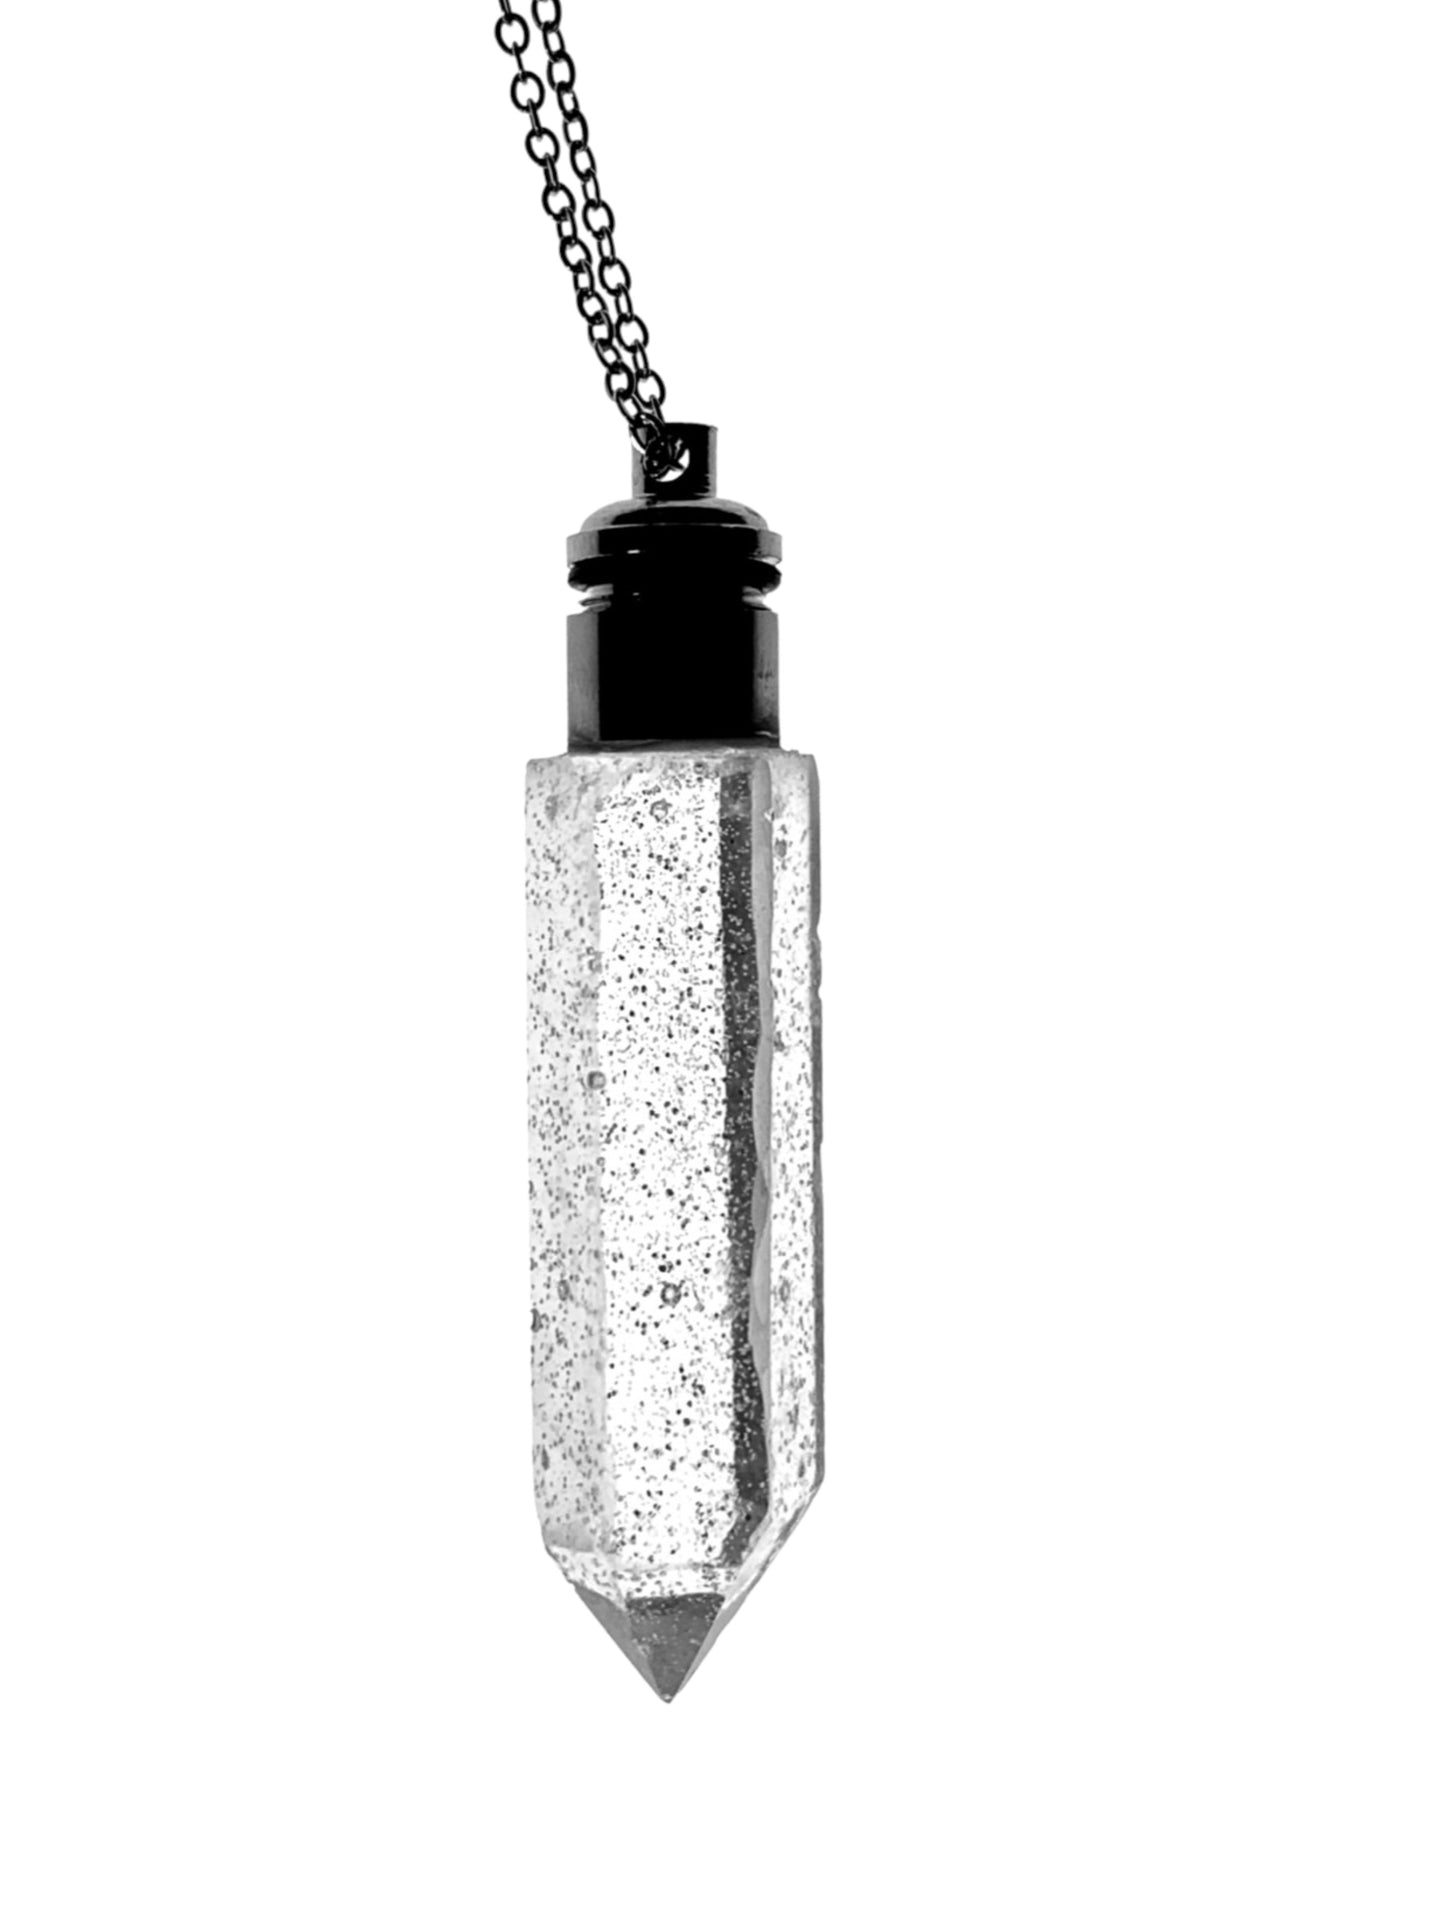 Warm White LED Crystal Necklace, Resin, Glowing